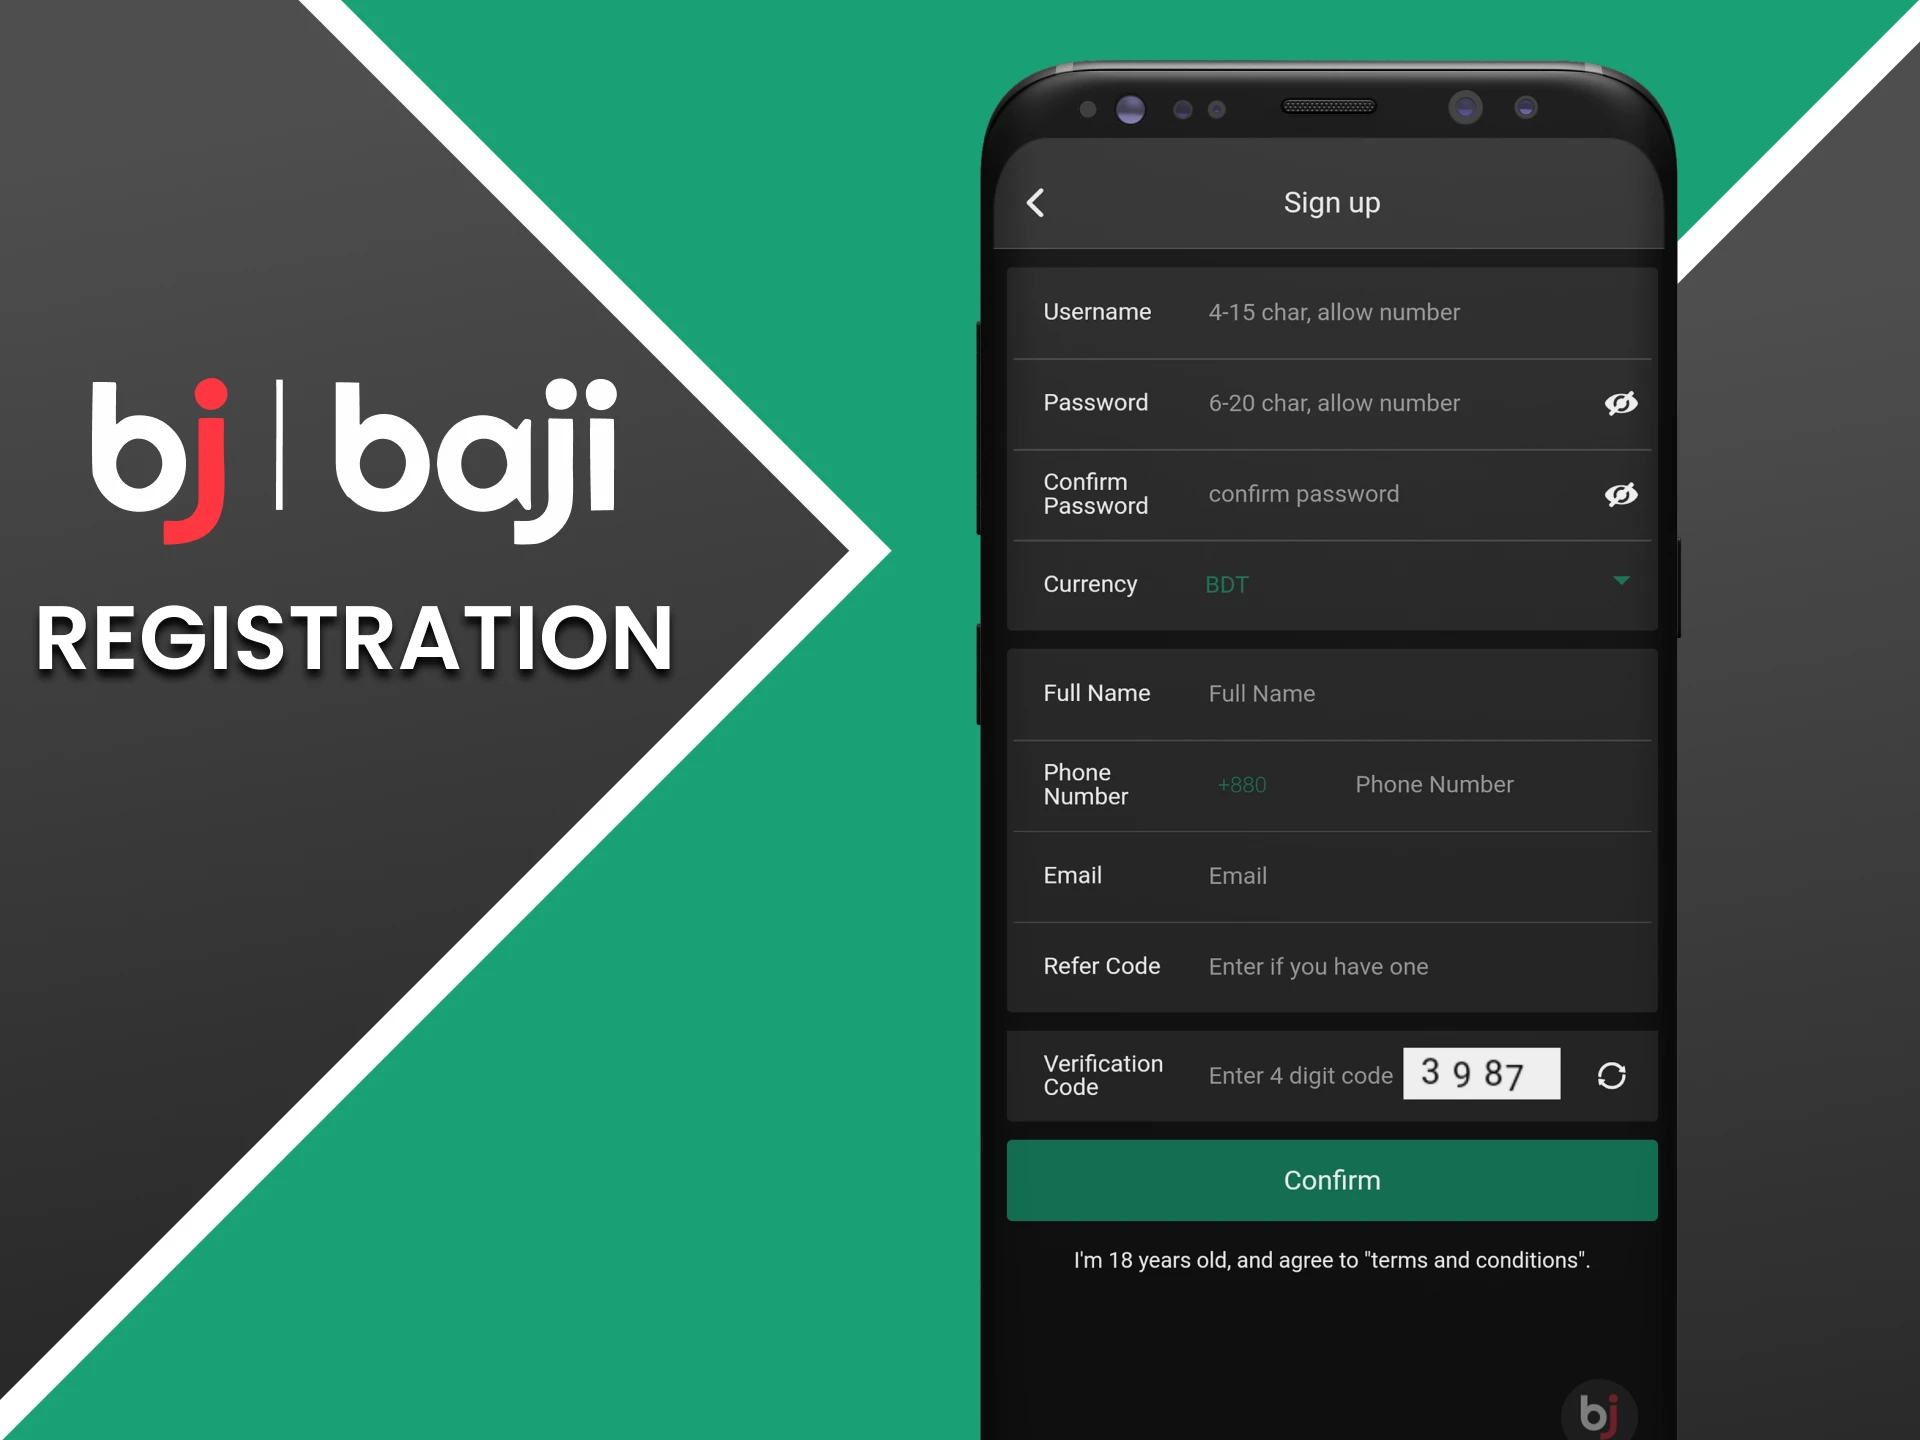 Instructions for registering via official Baji game app. Follow these steps to start playing.